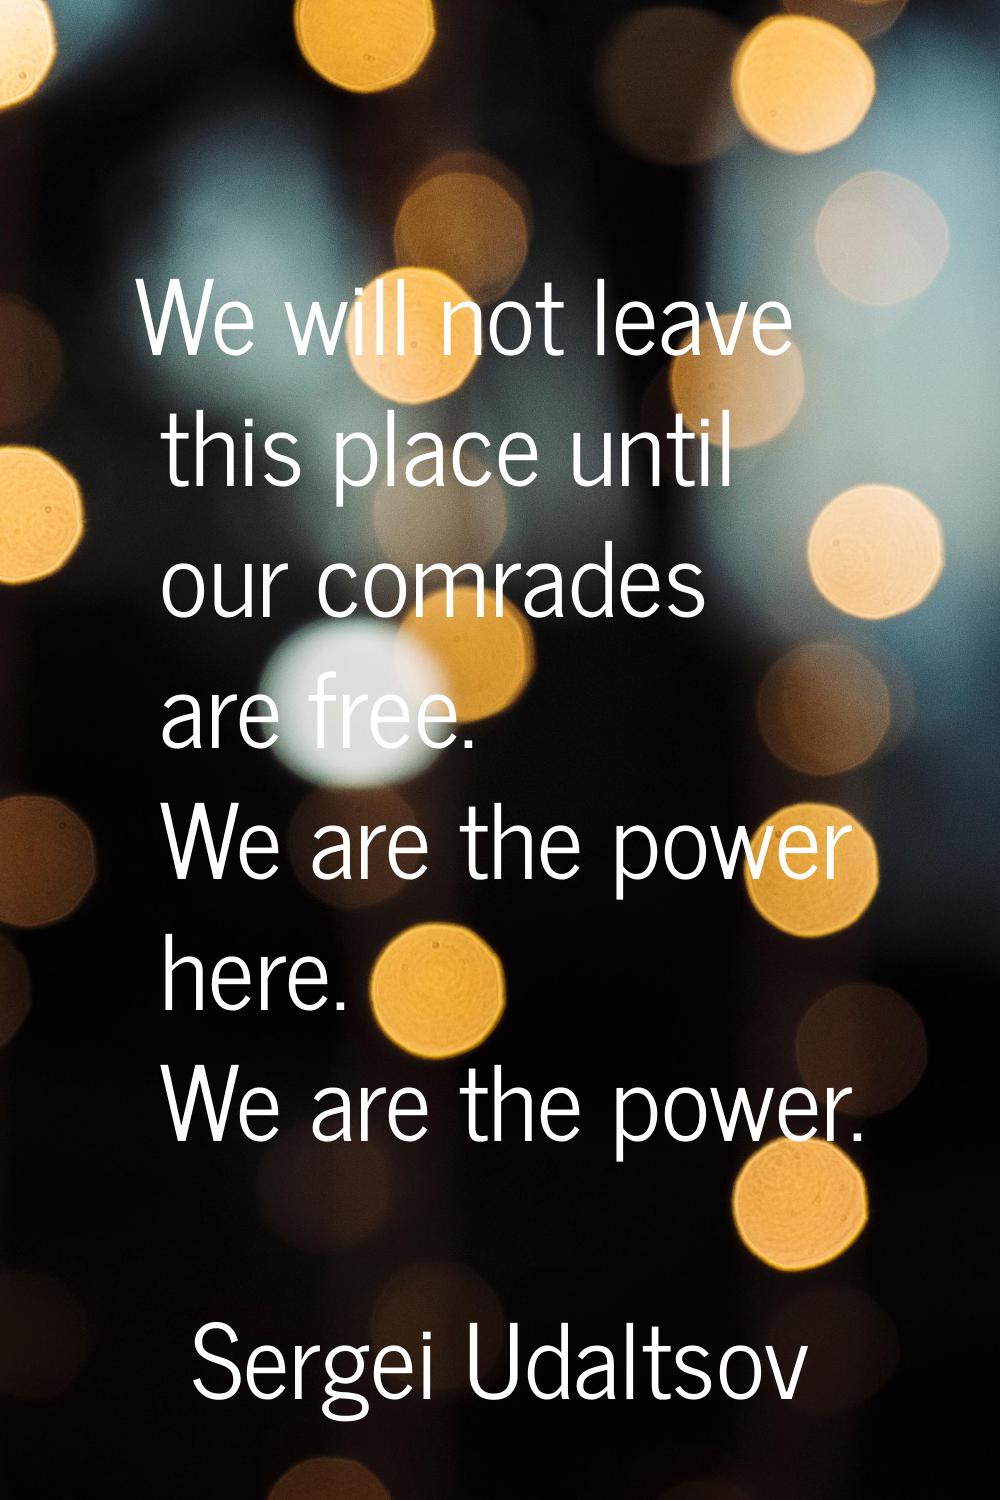 We will not leave this place until our comrades are free. We are the power here. We are the power.